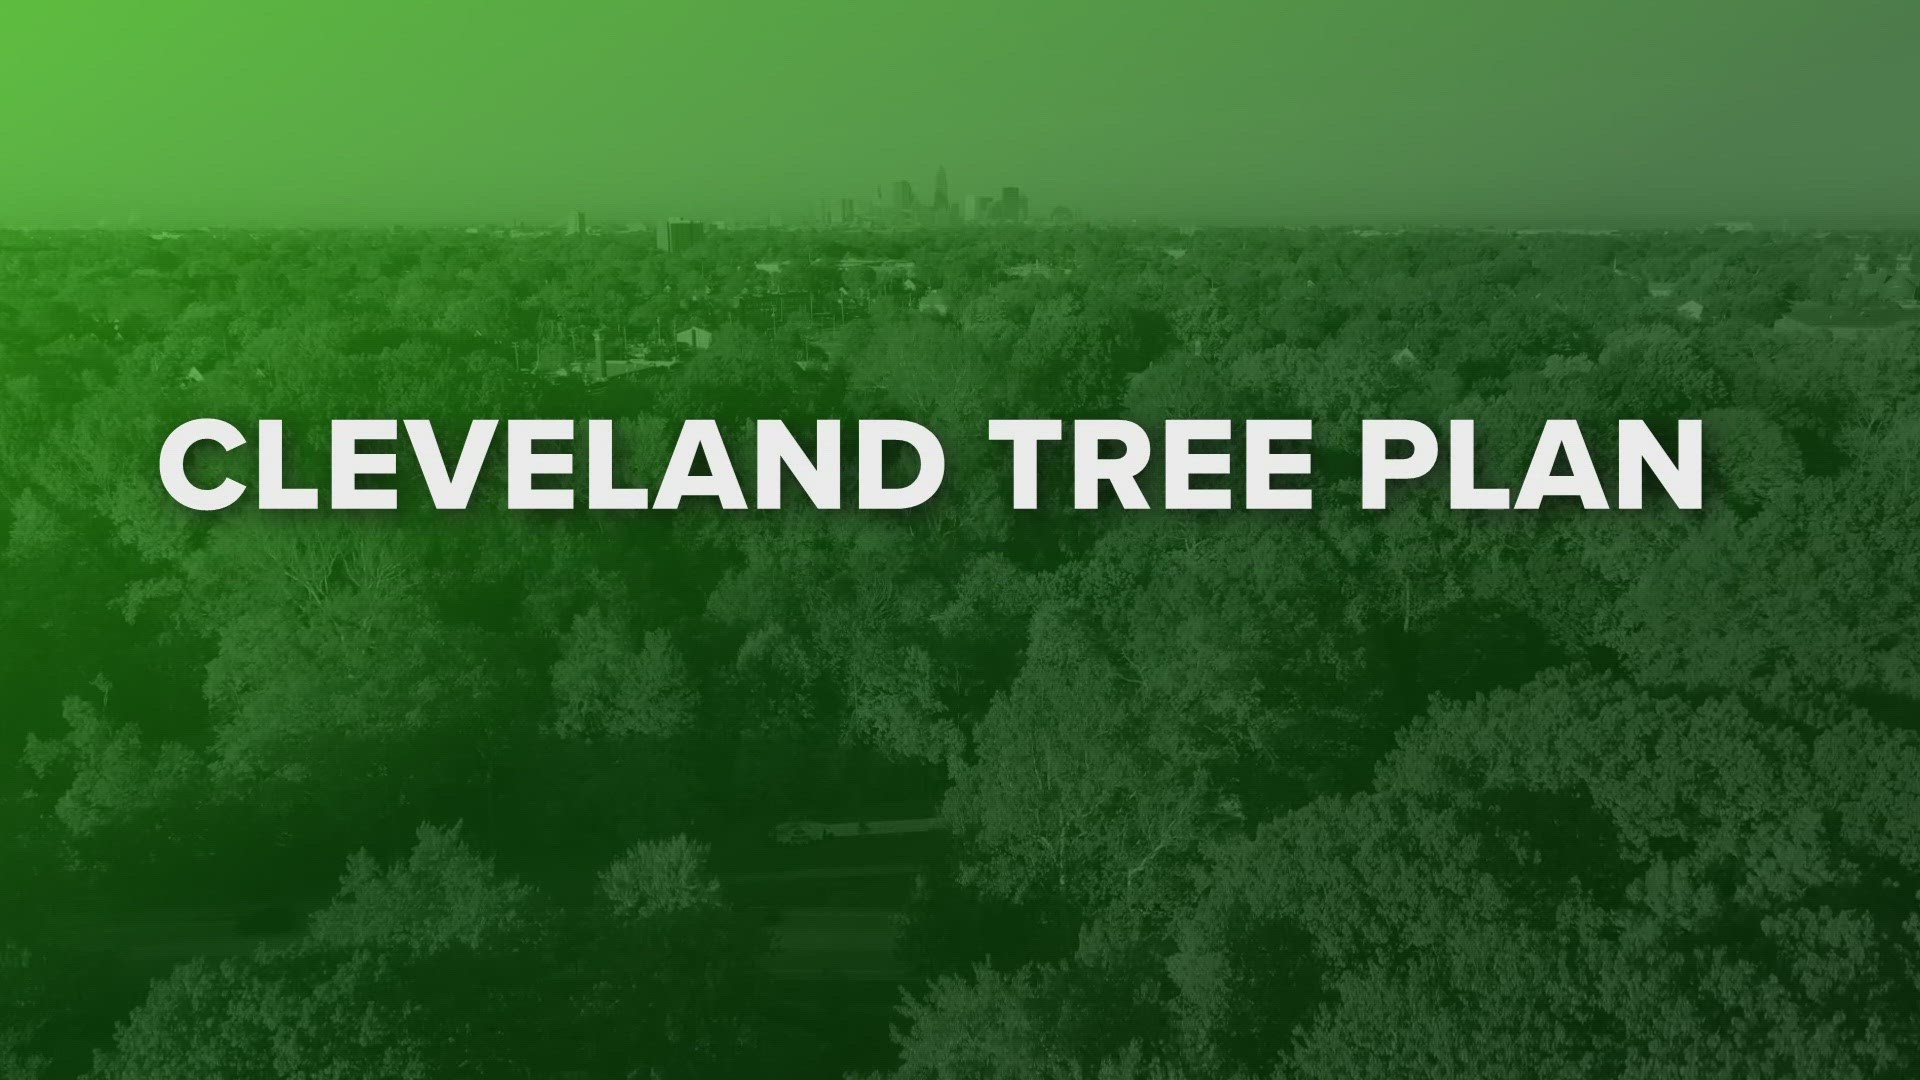 Cleveland’s tree canopy is currently at 18 percent, down from 21 percent in 2000. The goal is to have 30 percent canopy cover in Cleveland by 2040.